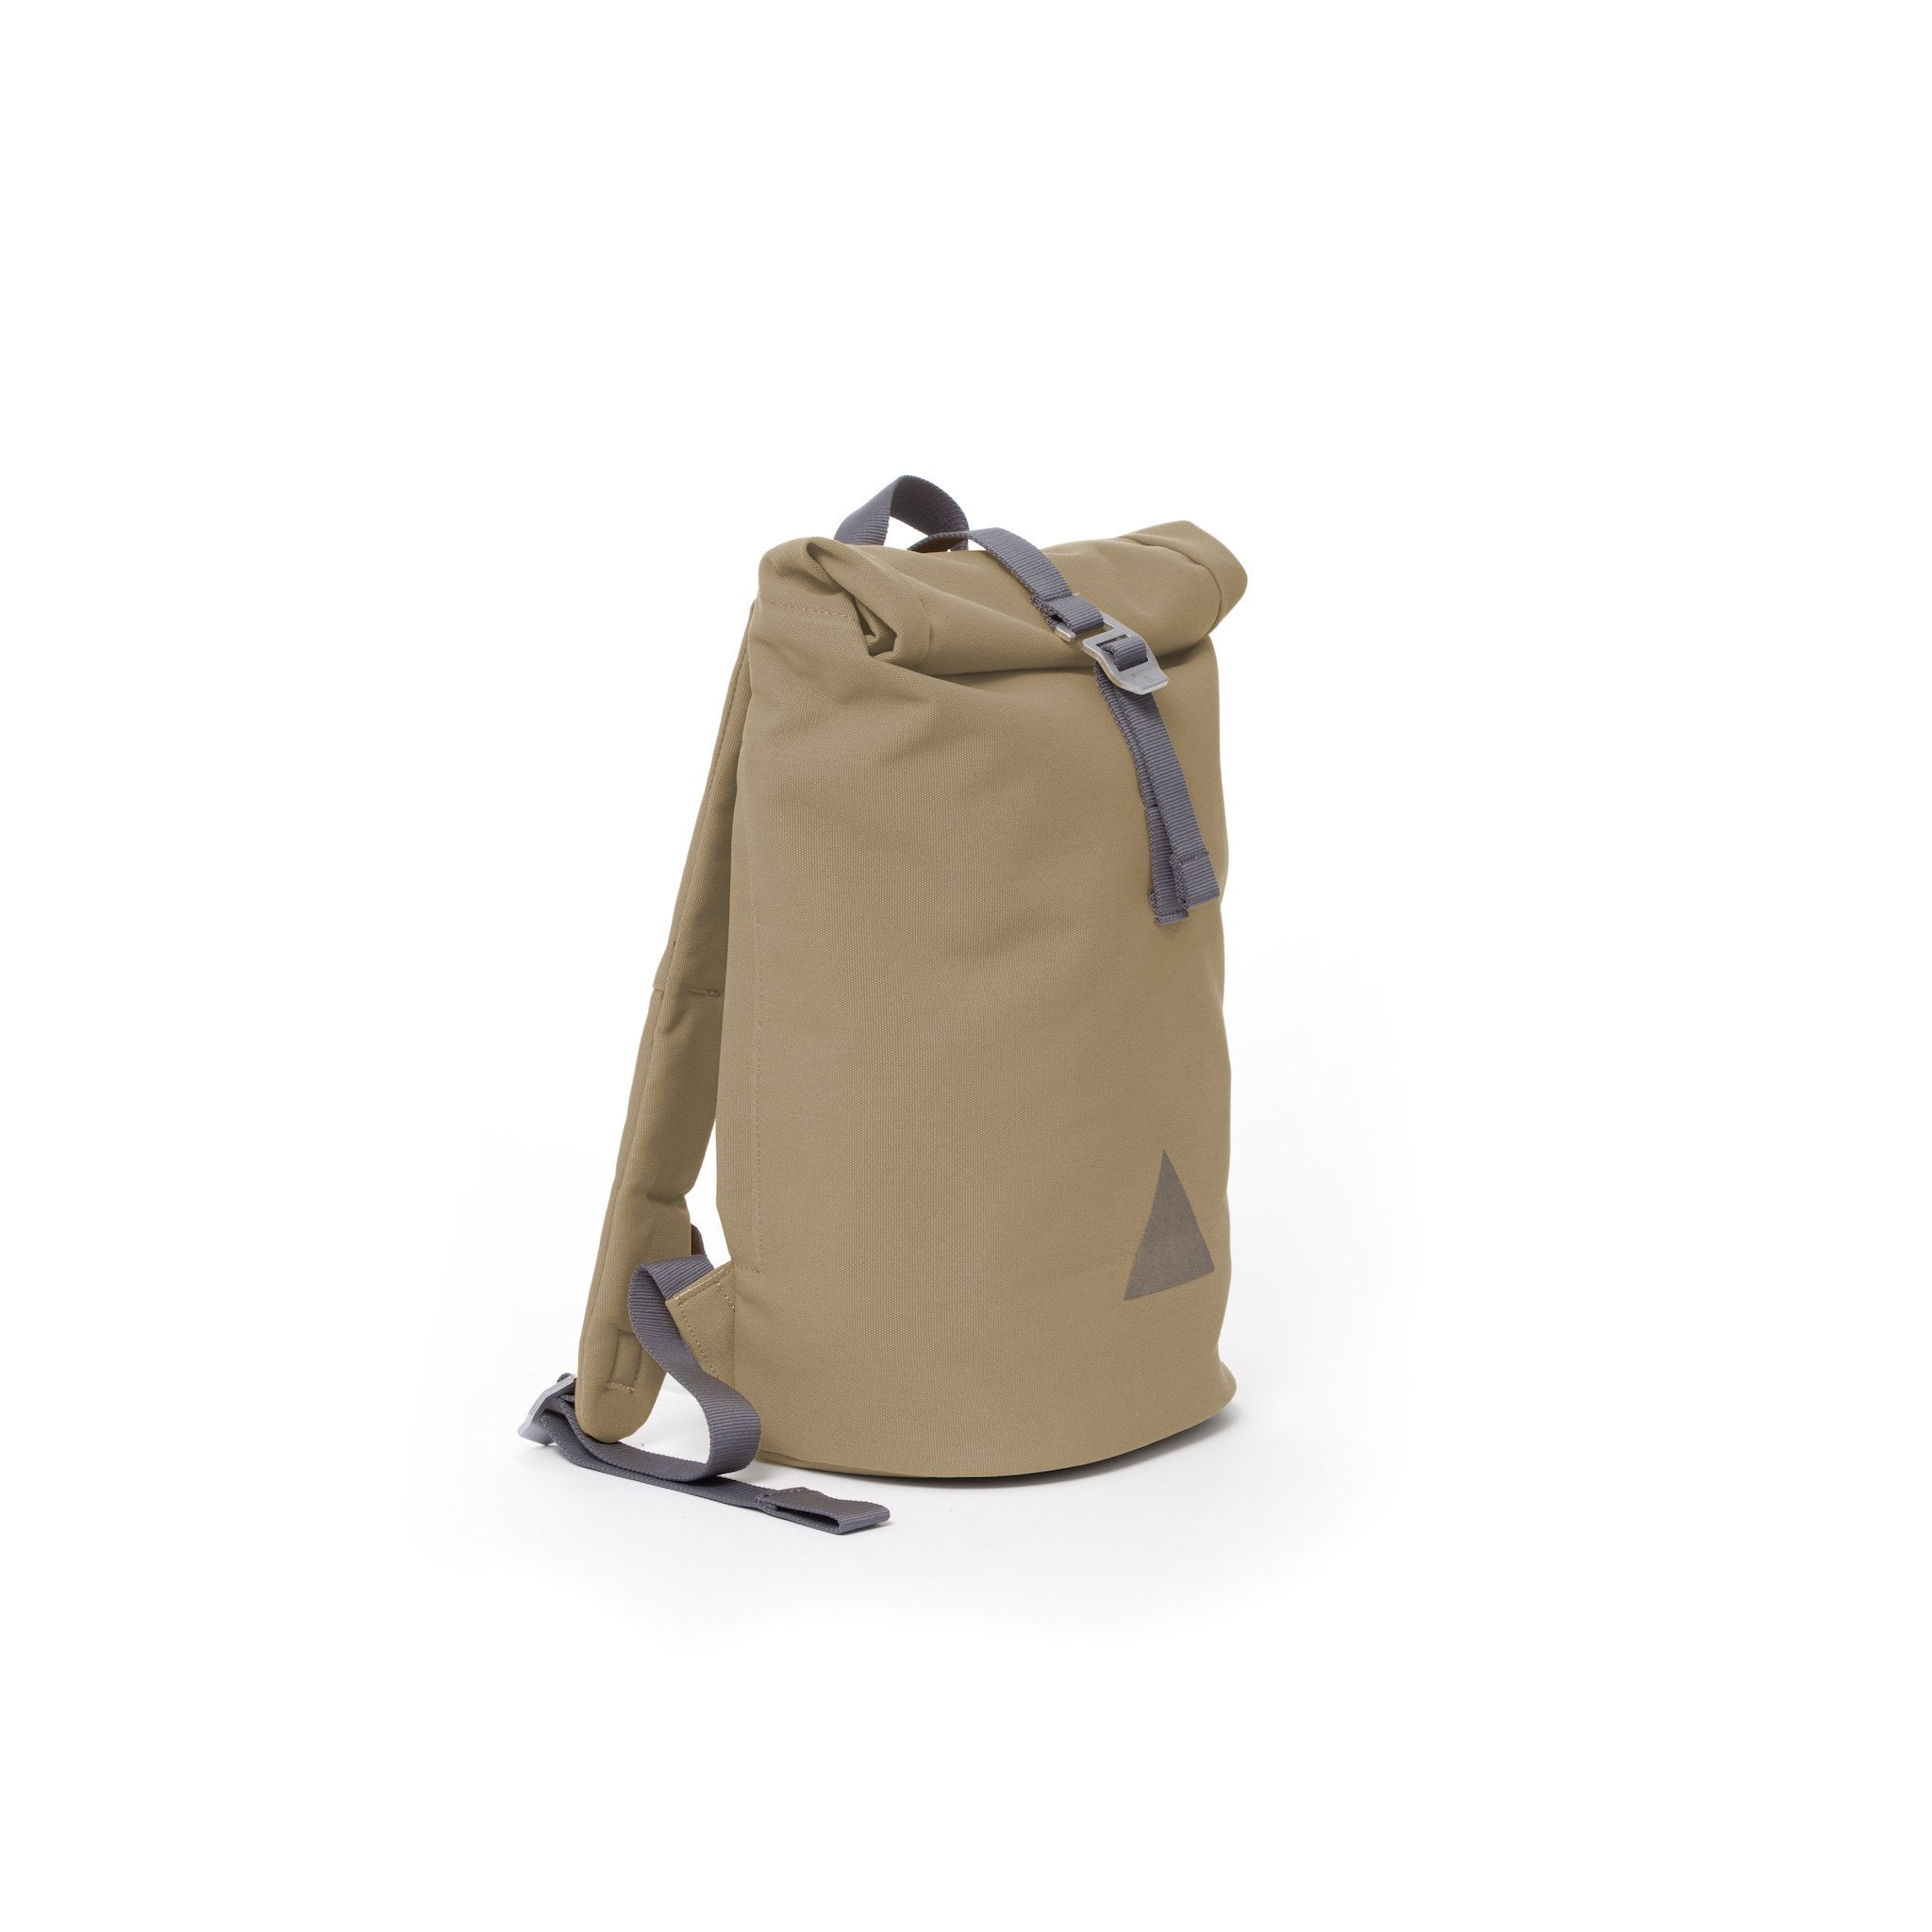 Khaki recycled canvas women’s rolltop backpack.